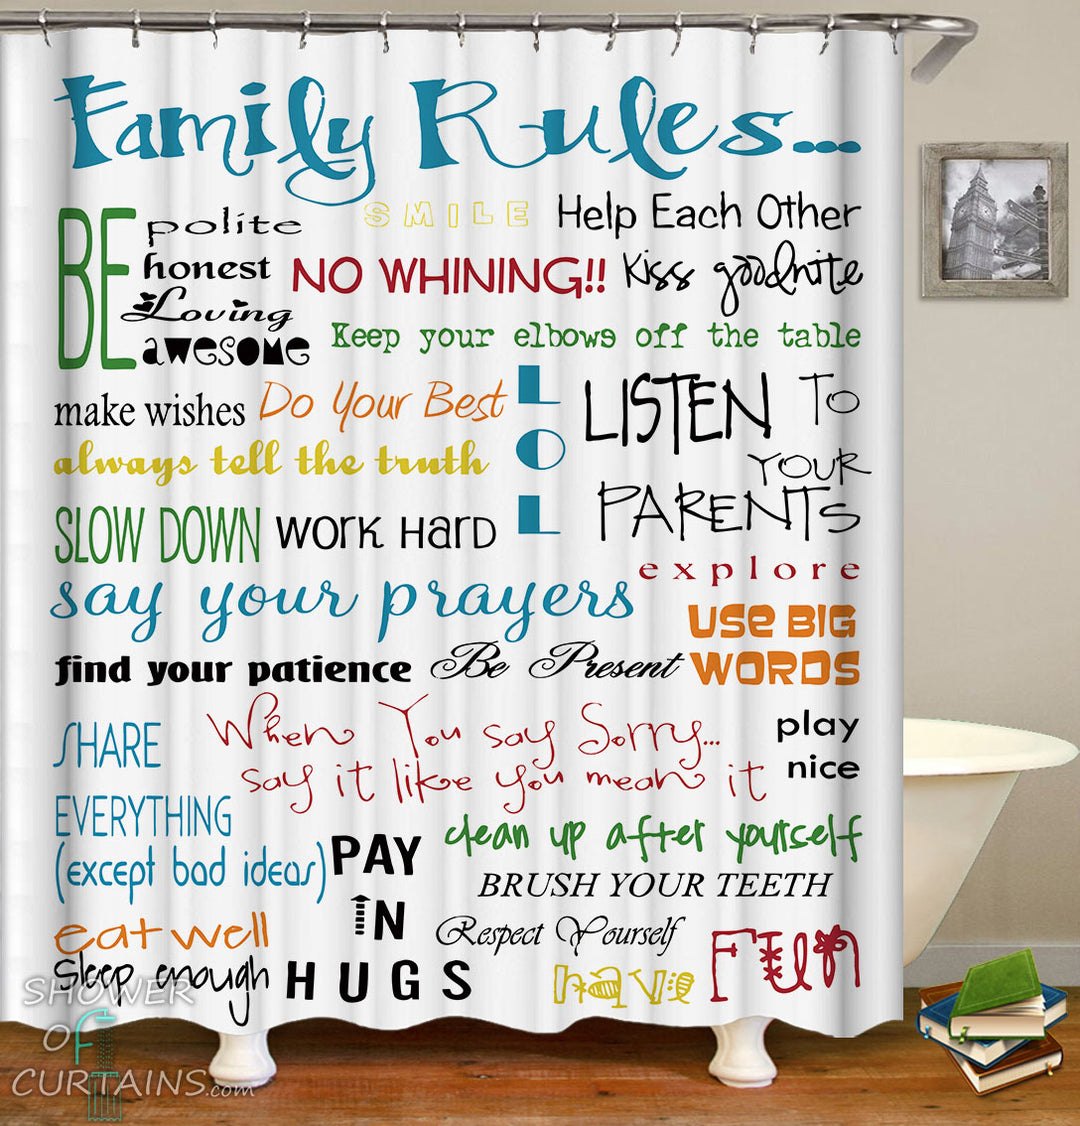 Family Rules Shower Curtain - Multi Colored Bathroom Decor For Kids